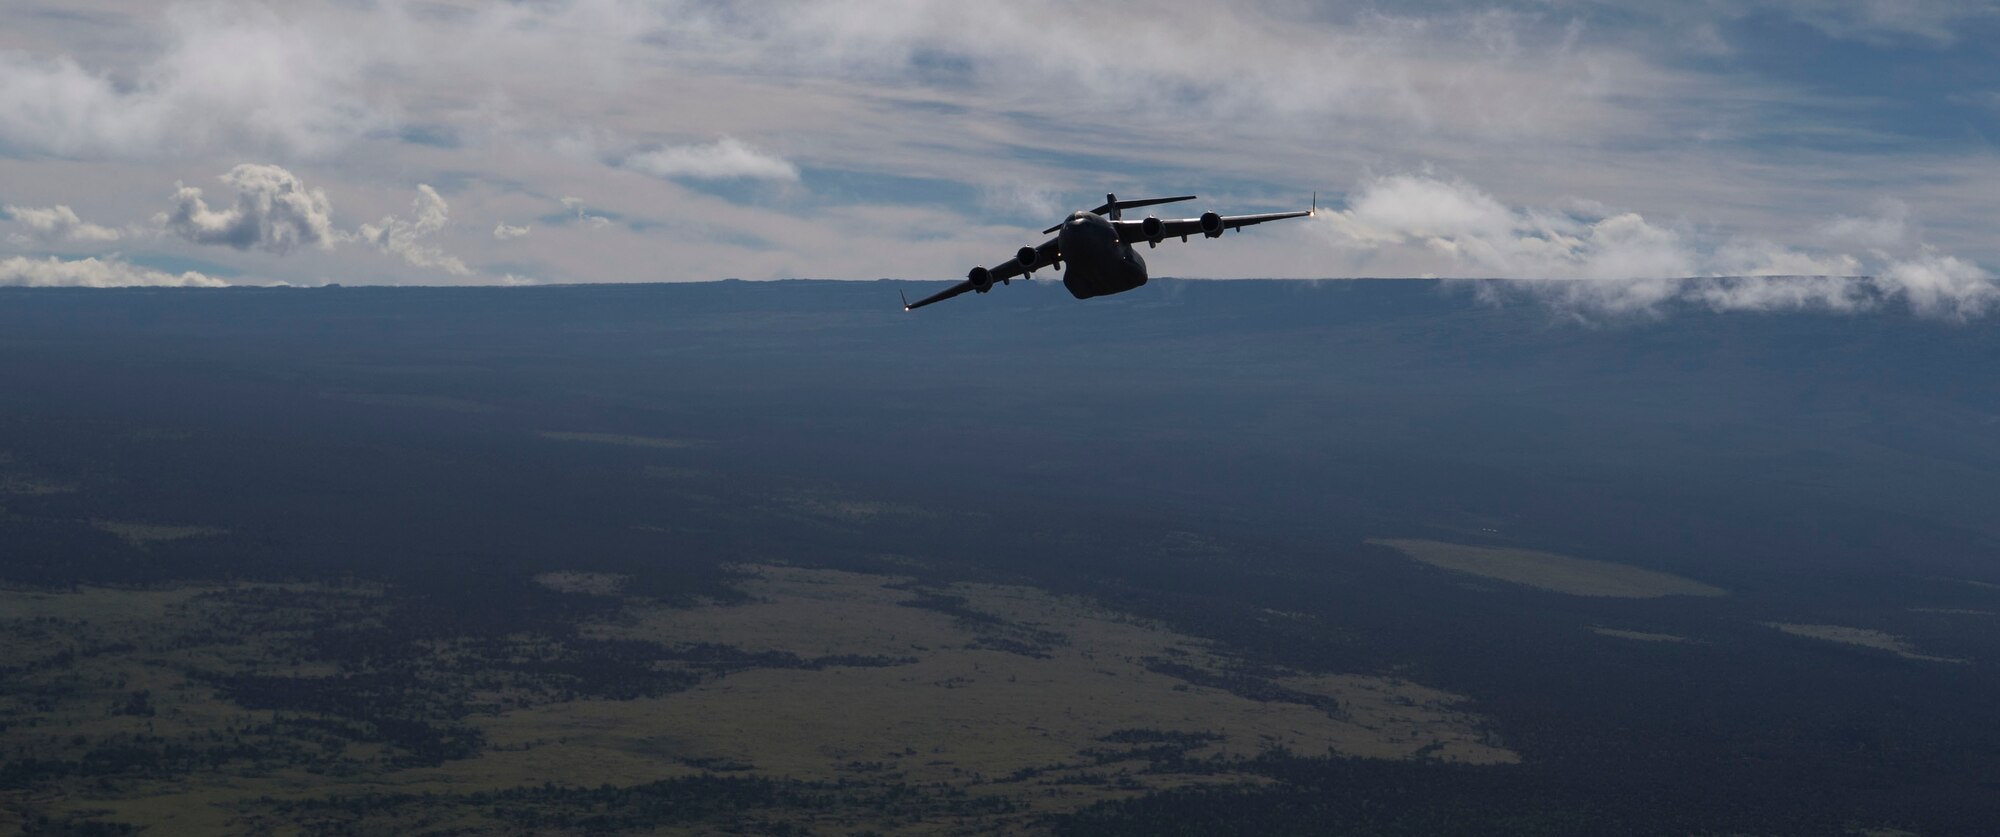 A C-17 Globemaster III, assigned to Joint Base Pearl Harbor-Hickam, Hawaii, flies above the Pohakuloa Training Area during Big Island Drop Week, on Hilo, Hawaii Nov. 7, 2018. Big Island Drop Week allowed aircrews to conduct mission planning and airdrop training in an environment that is not available Oahu, Hawaii. (U.S. Air Force photo by Tech. Sgt. Heather Redman)